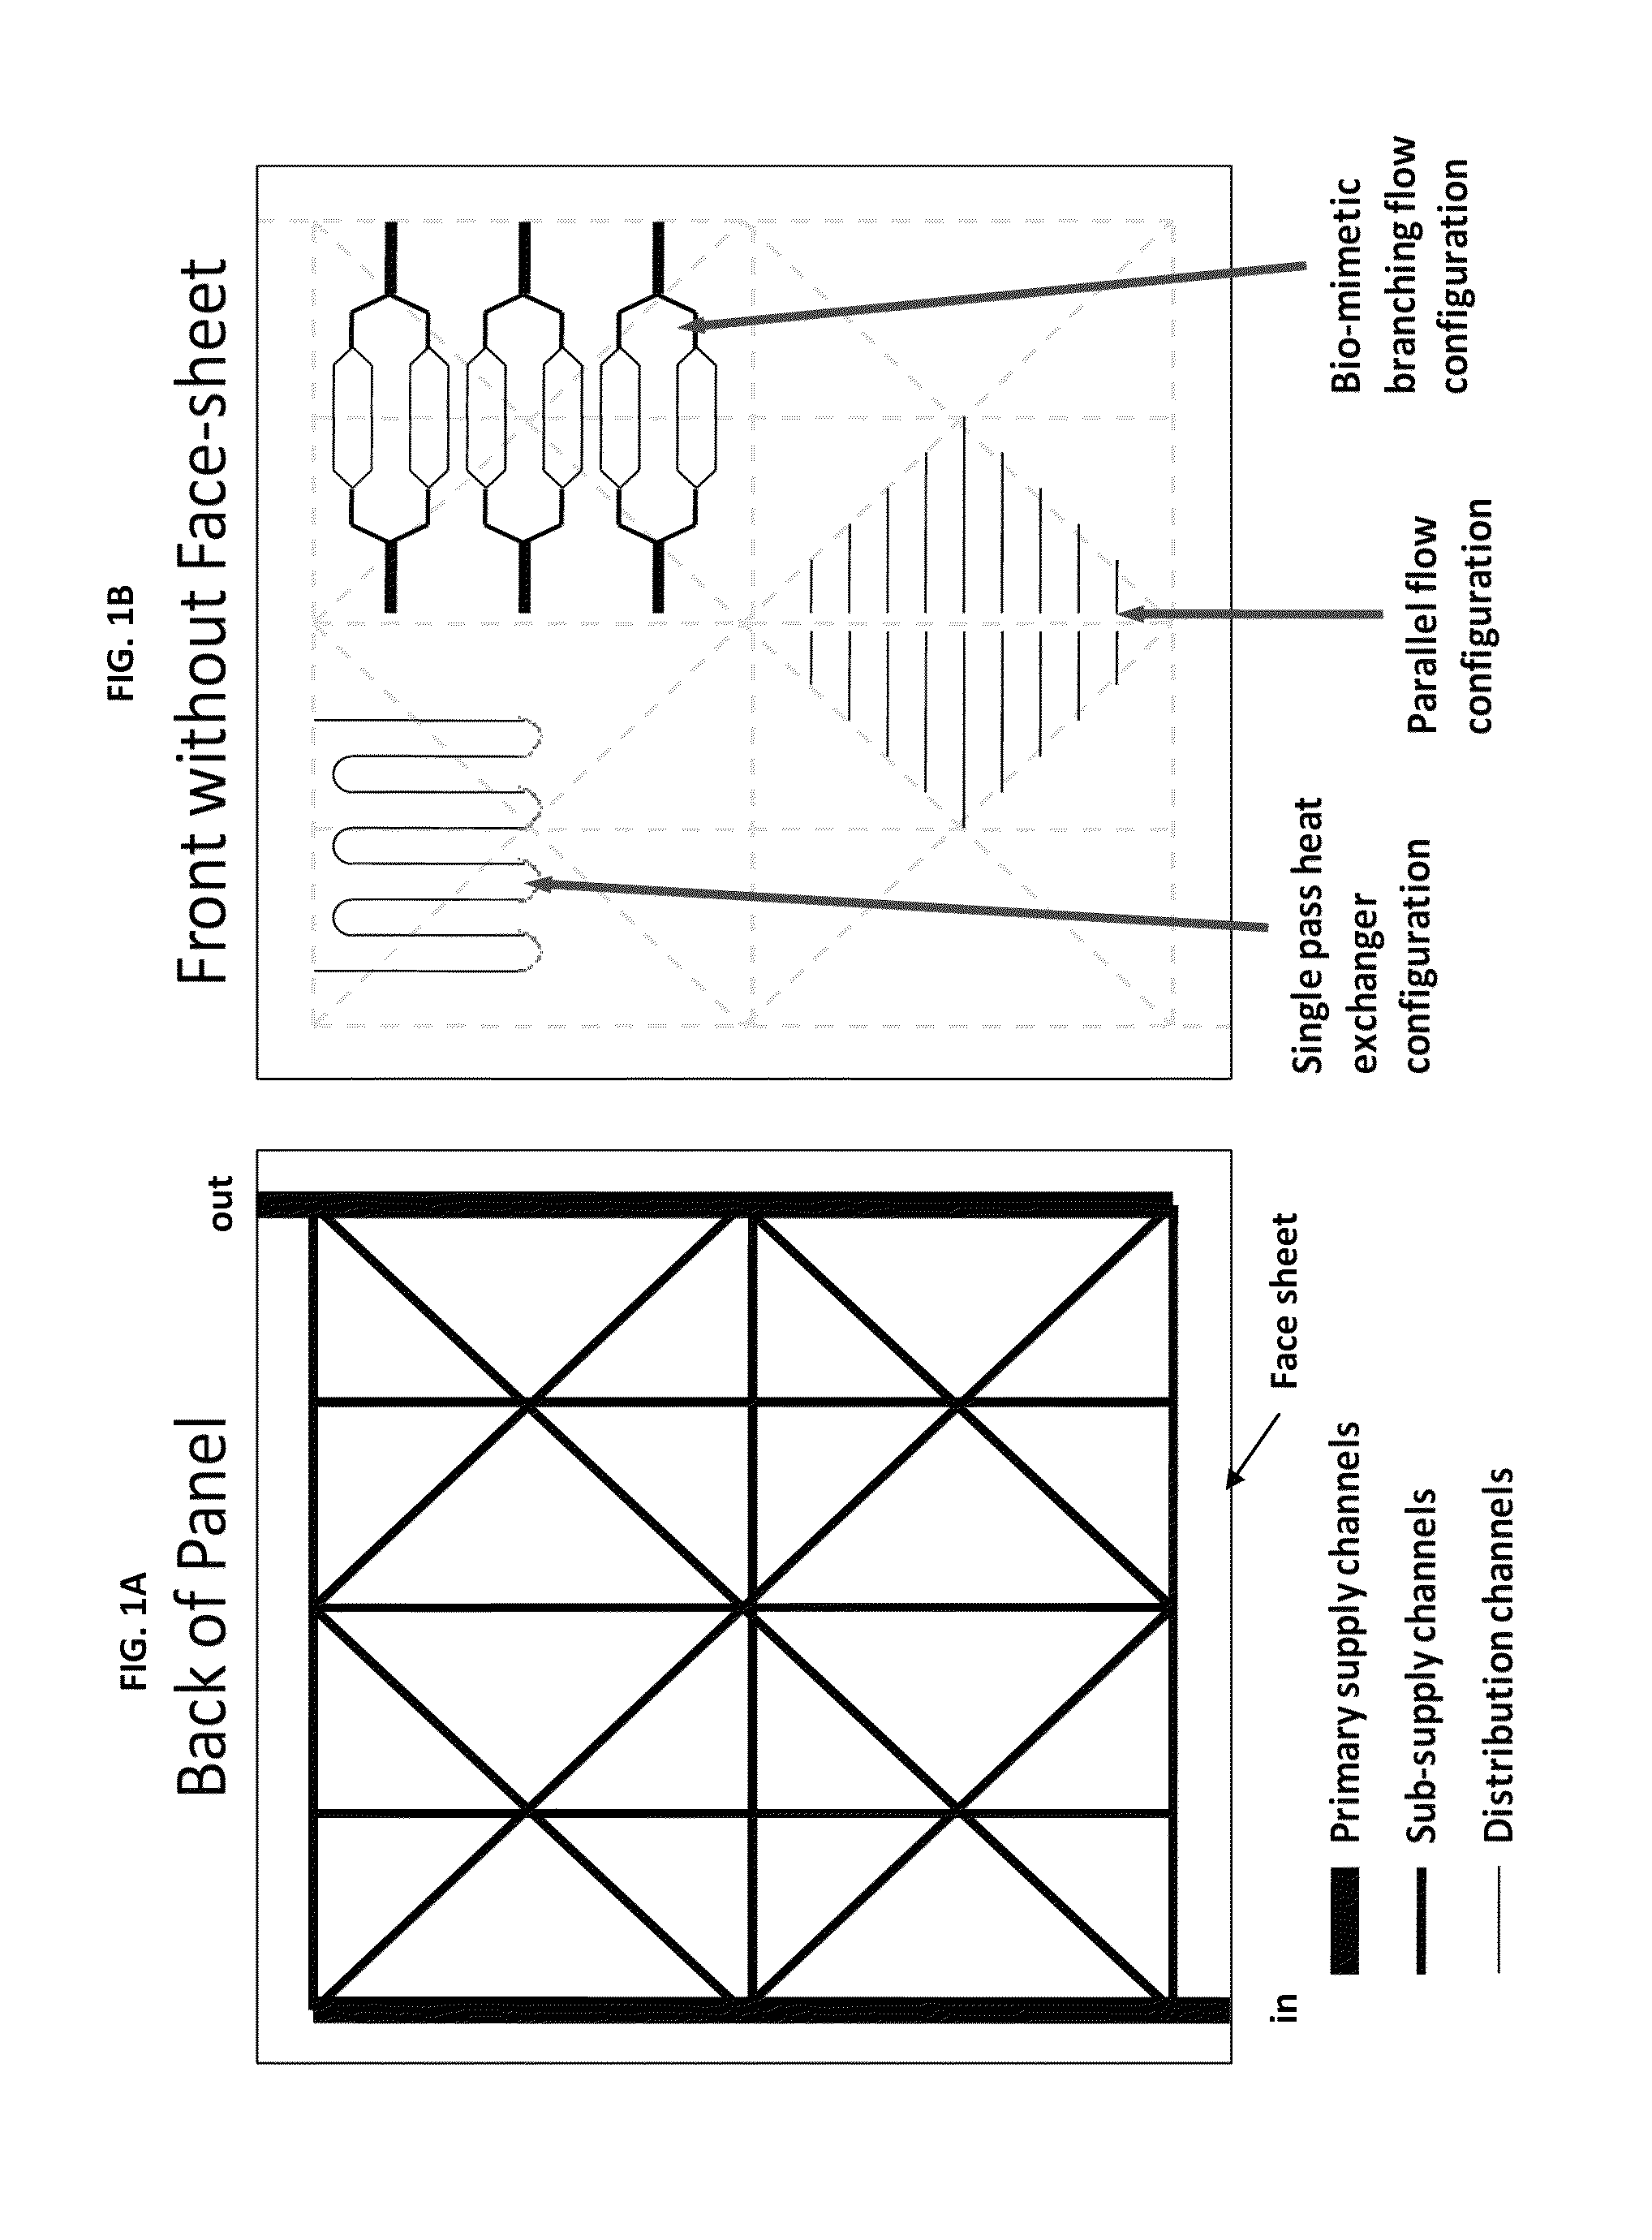 Method for fabricating composite grid-stiffened structures with integrated fluid channels